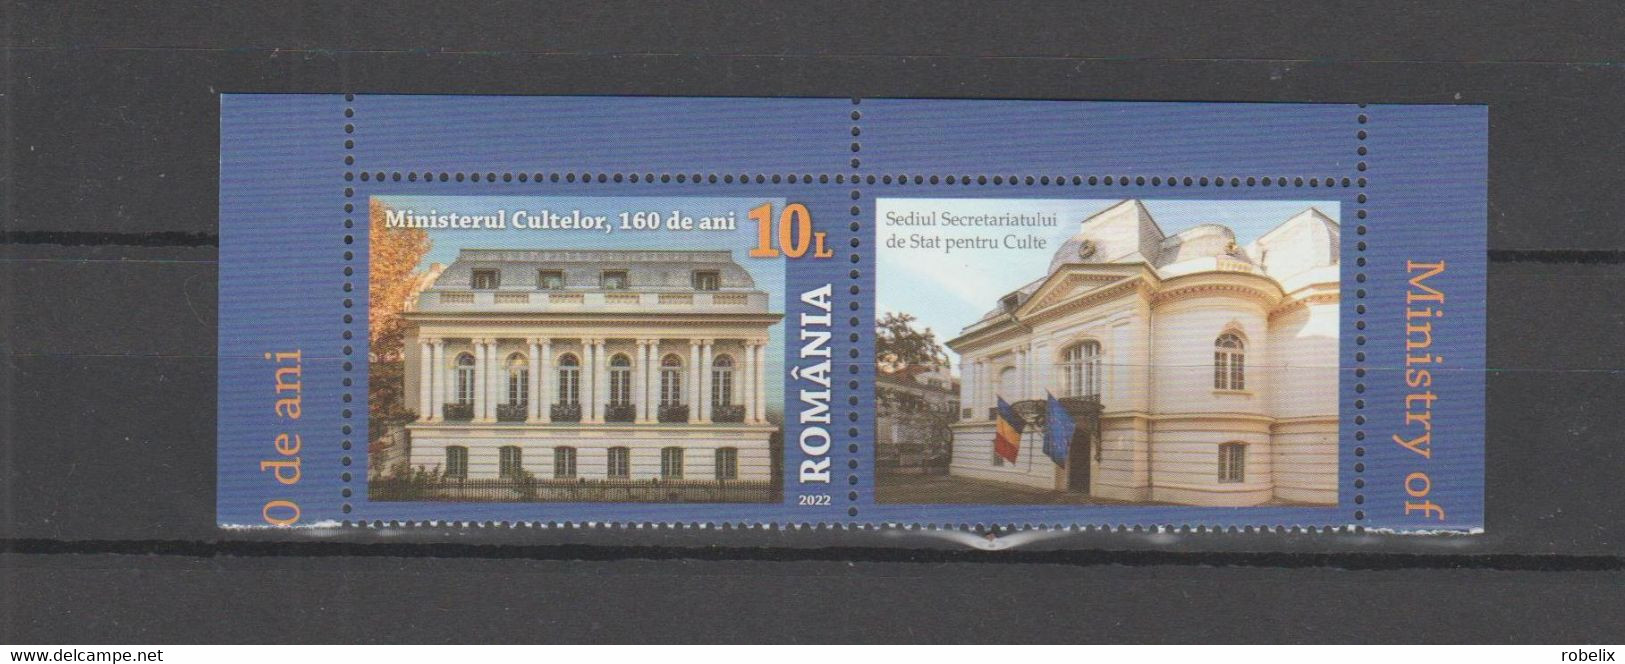 ROMANIA  2022  Ministry Of Religious Affairs, 160 Years - Set Of 1 Stamp With Label  MNH** - Nuovi